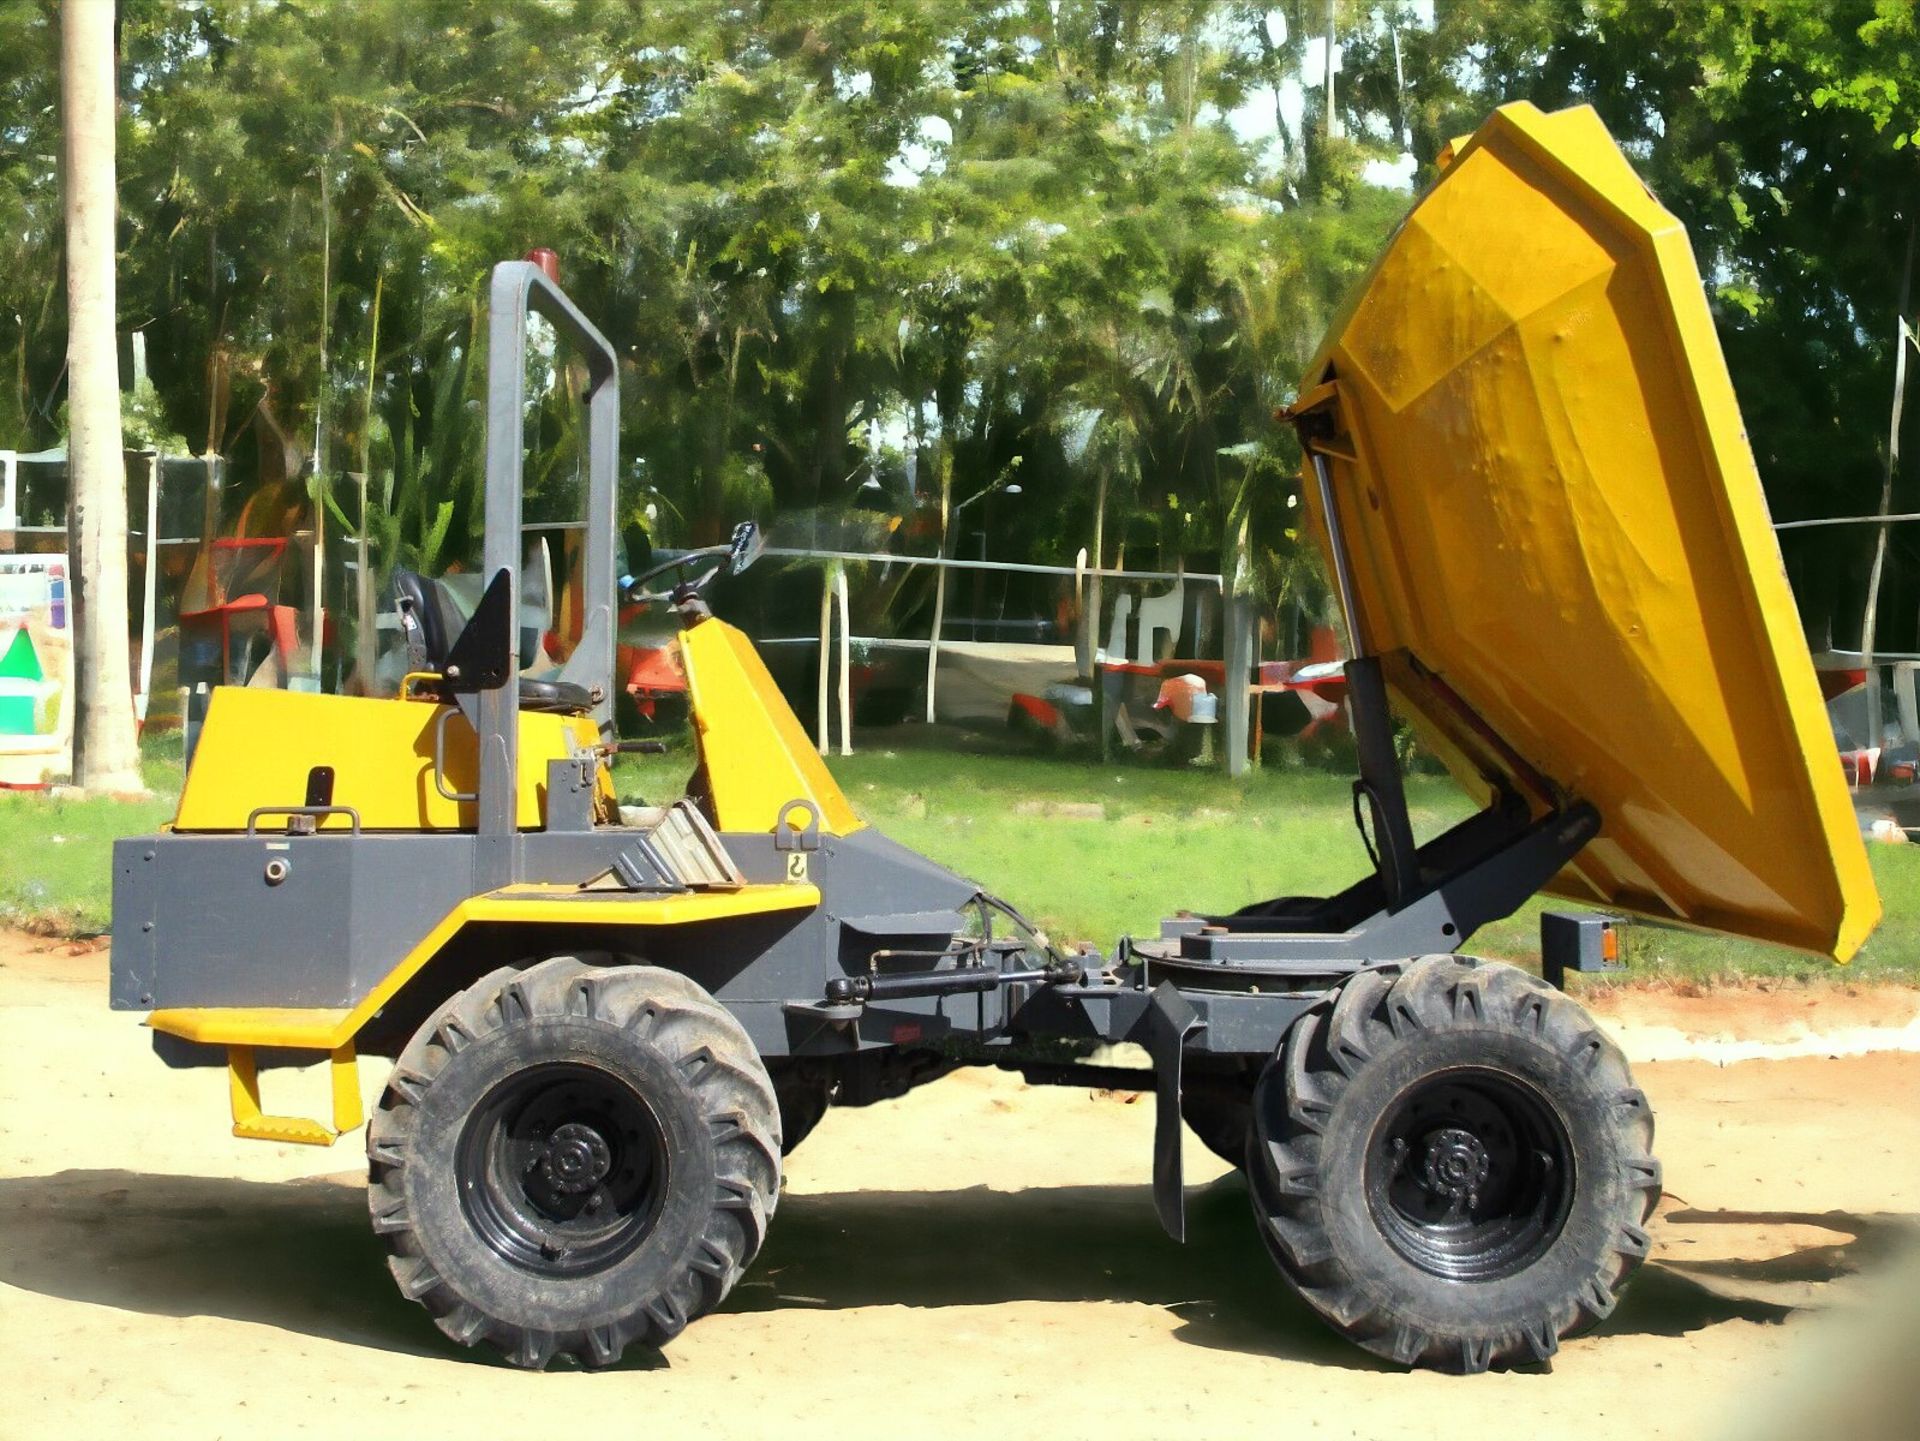 CONQUER YOUR PROJECTS WITH THE NEUSON 6-TON DUMPER